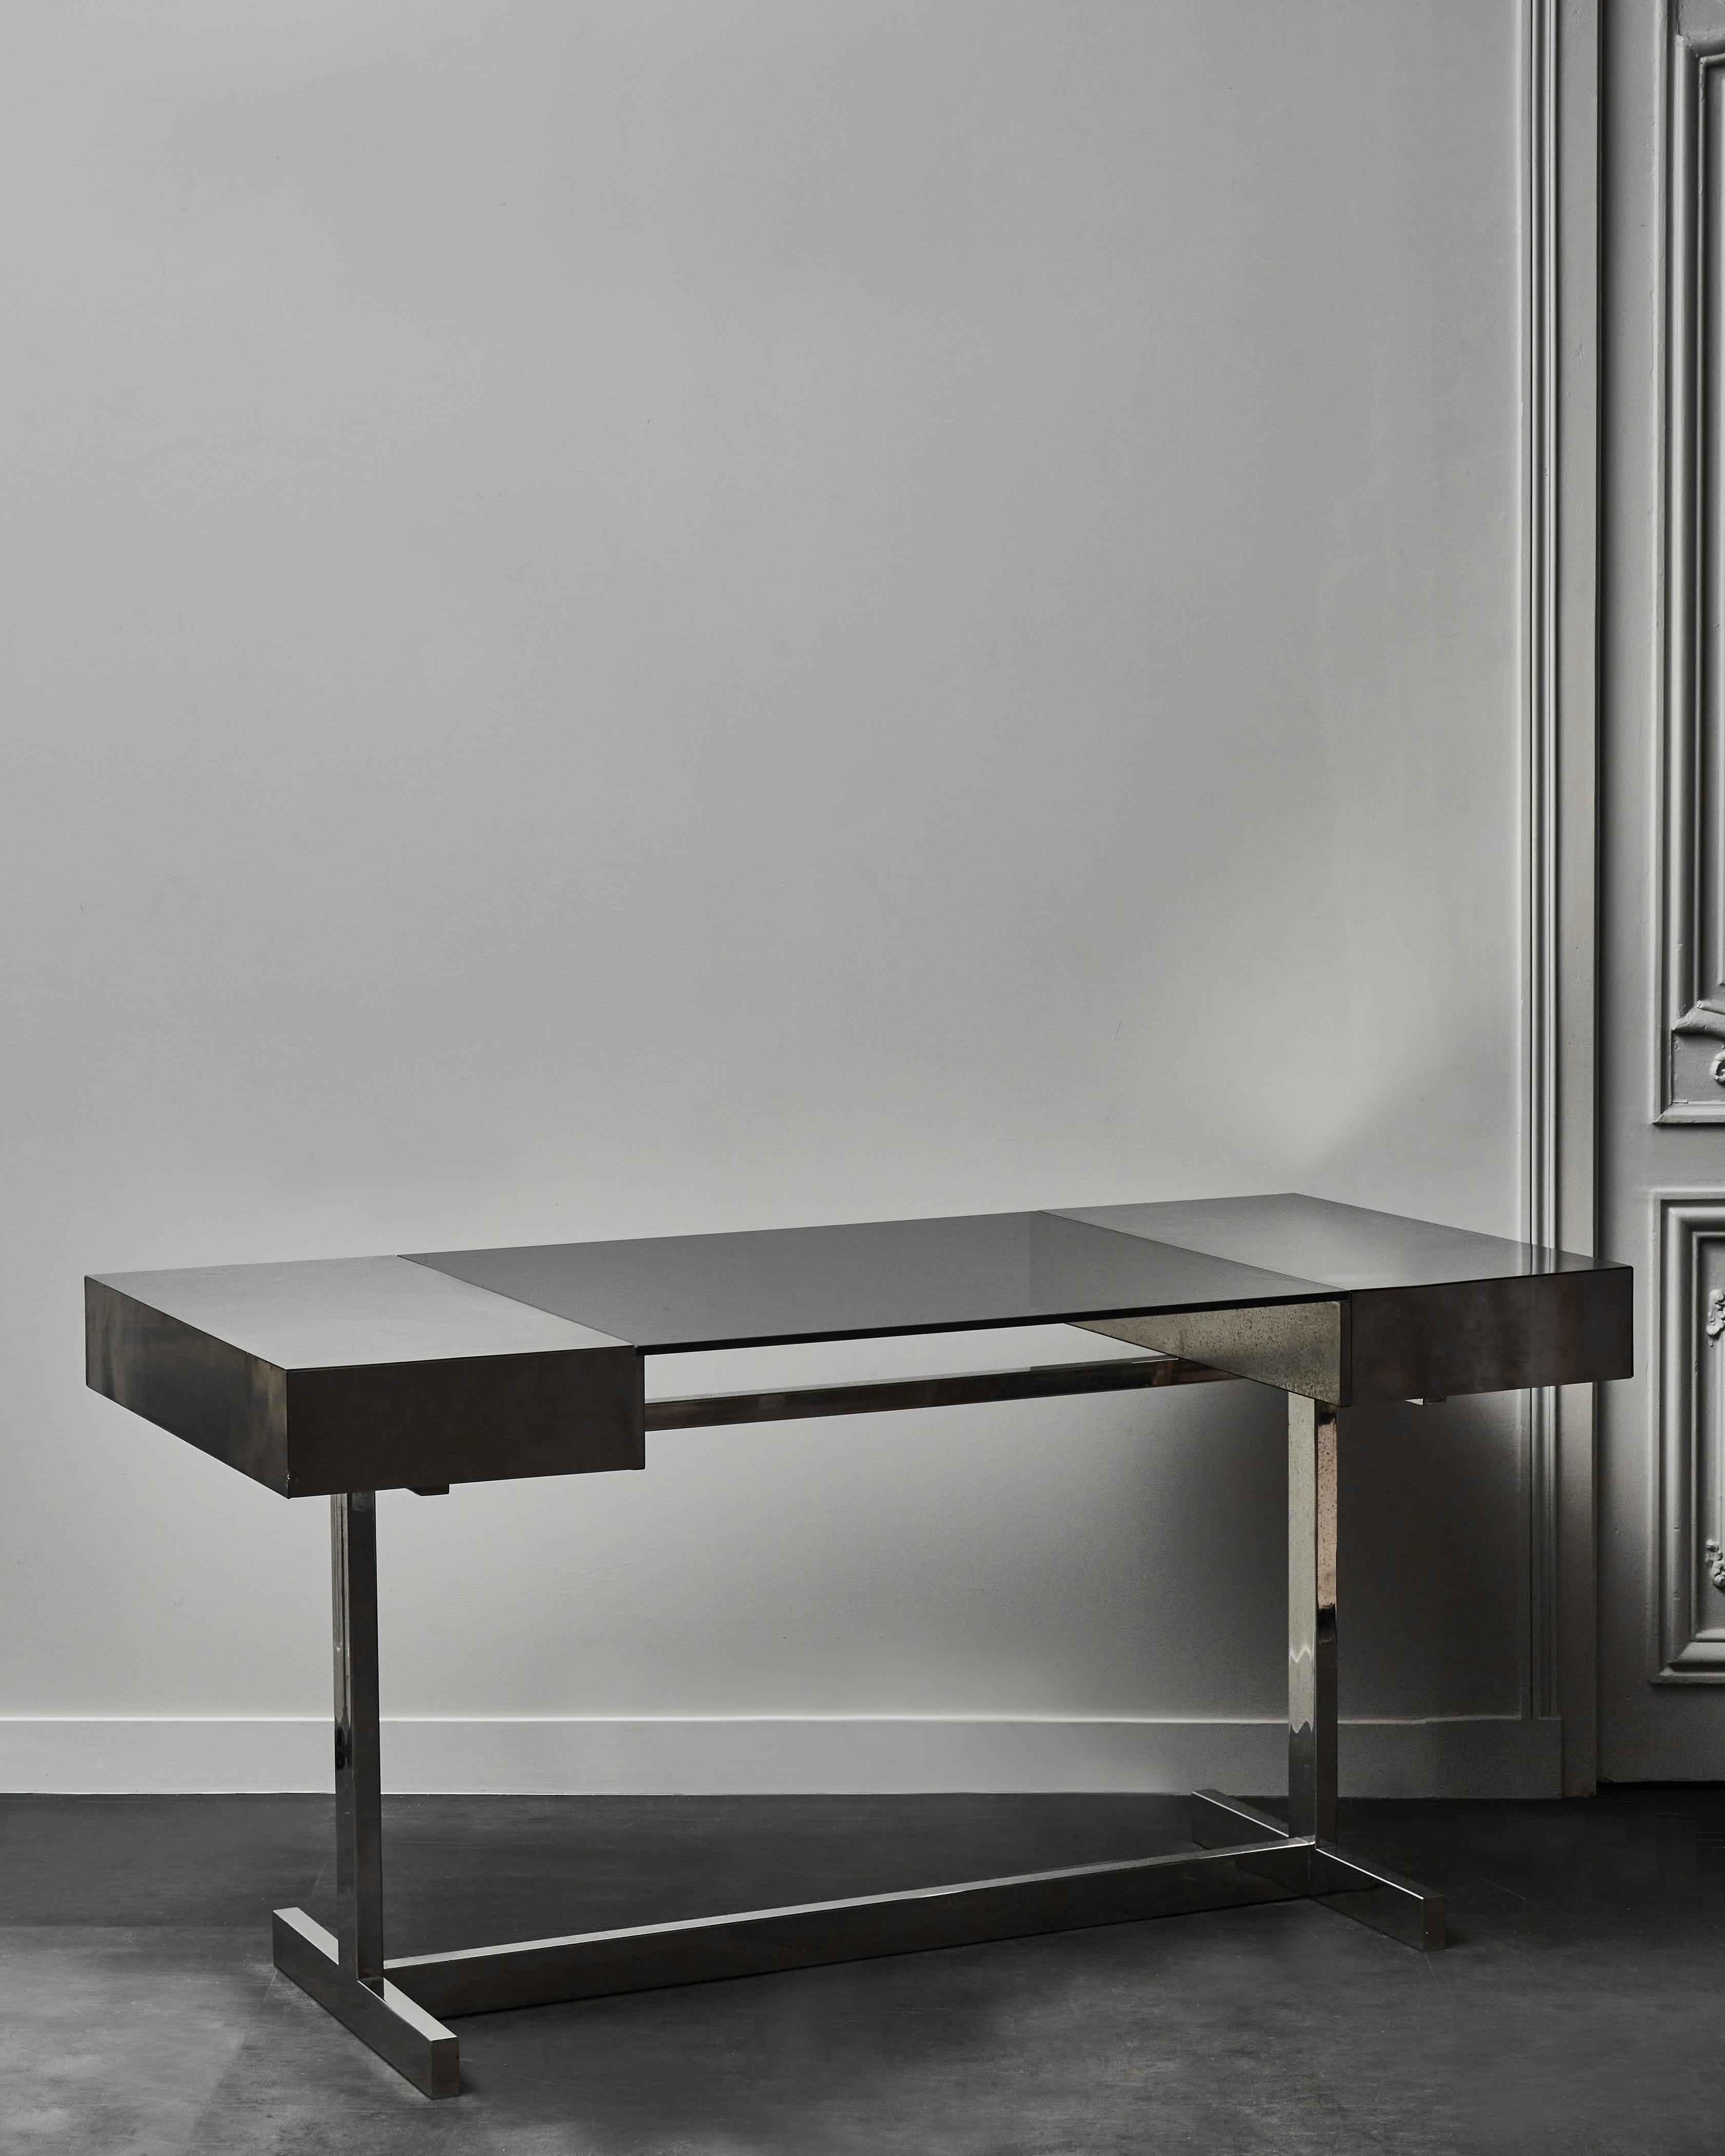 Great desk designed by Willy Rizzo and made in 1972, made of chromed steel feet, walnut drawers, brushed steel and smoked glass top.
Signed on the side and dated on the bottom. 
“27 Guigno 1972” or 27th of June 1972.
 